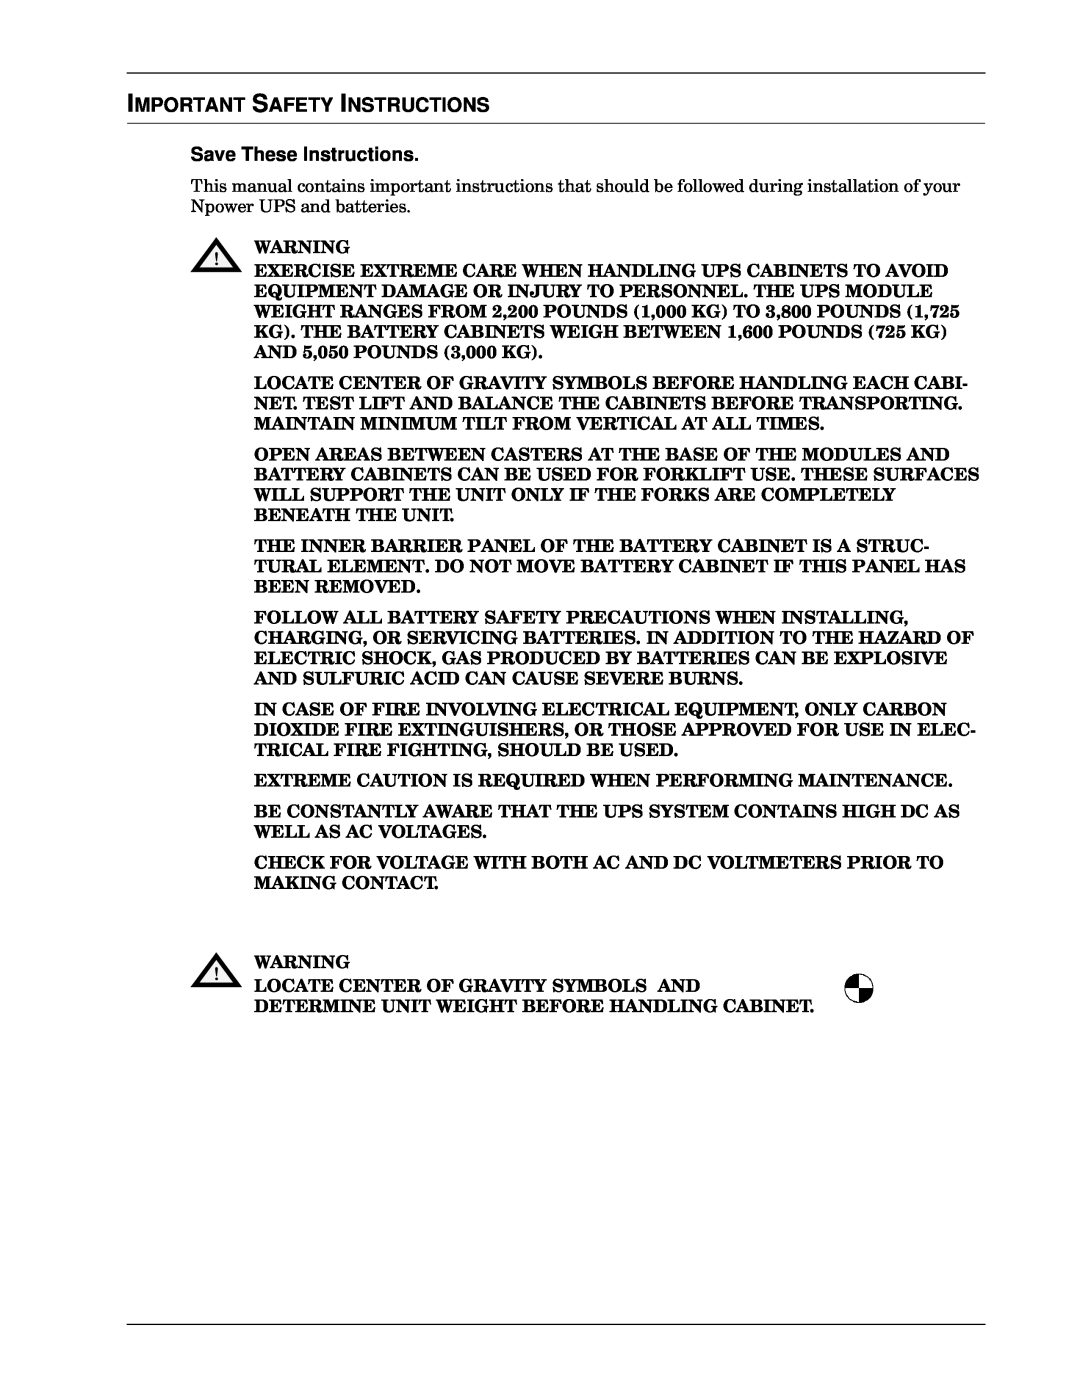 Emerson 30-130 kVA Important Safety Instructions, Save These Instructions, $51,1, 7+%$775&$%,176,*+%7132816.* $132816 